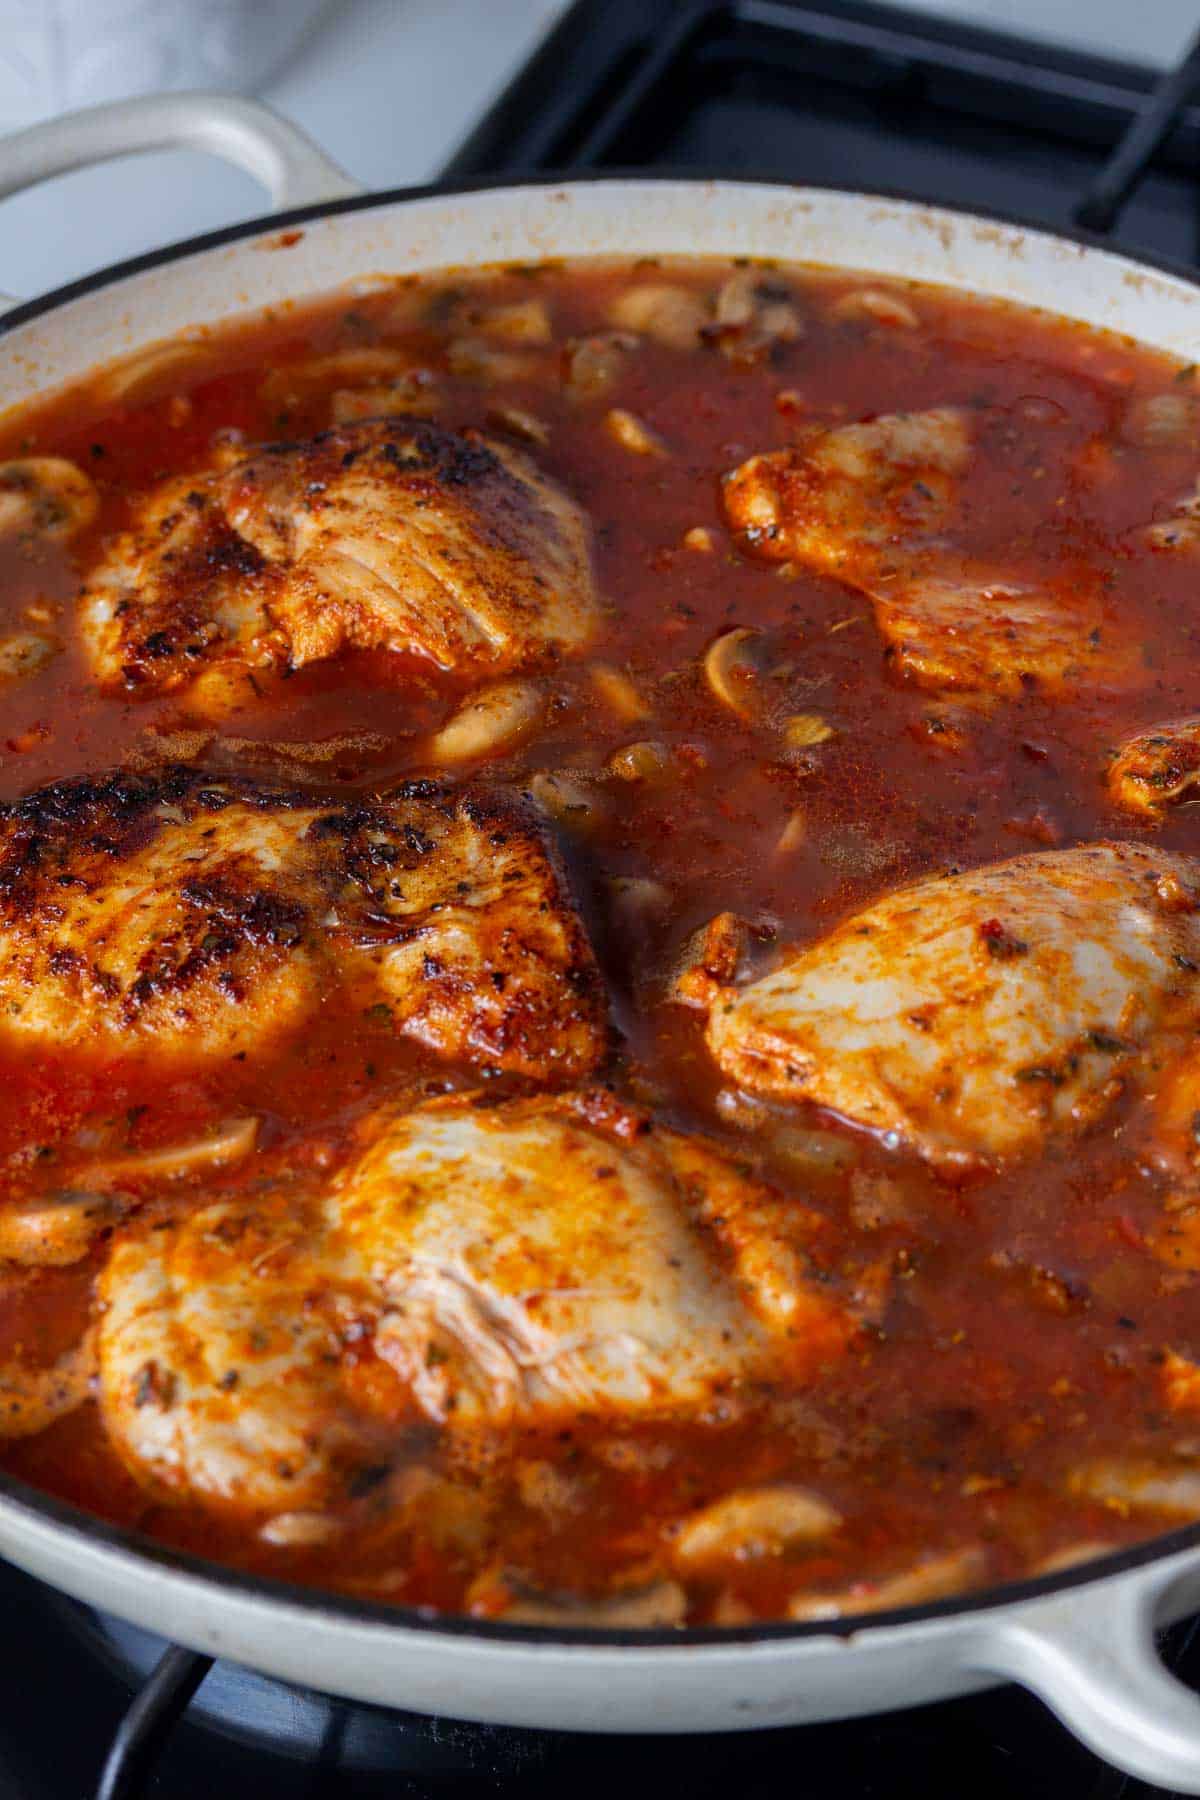 Chicken in a tomato sauce